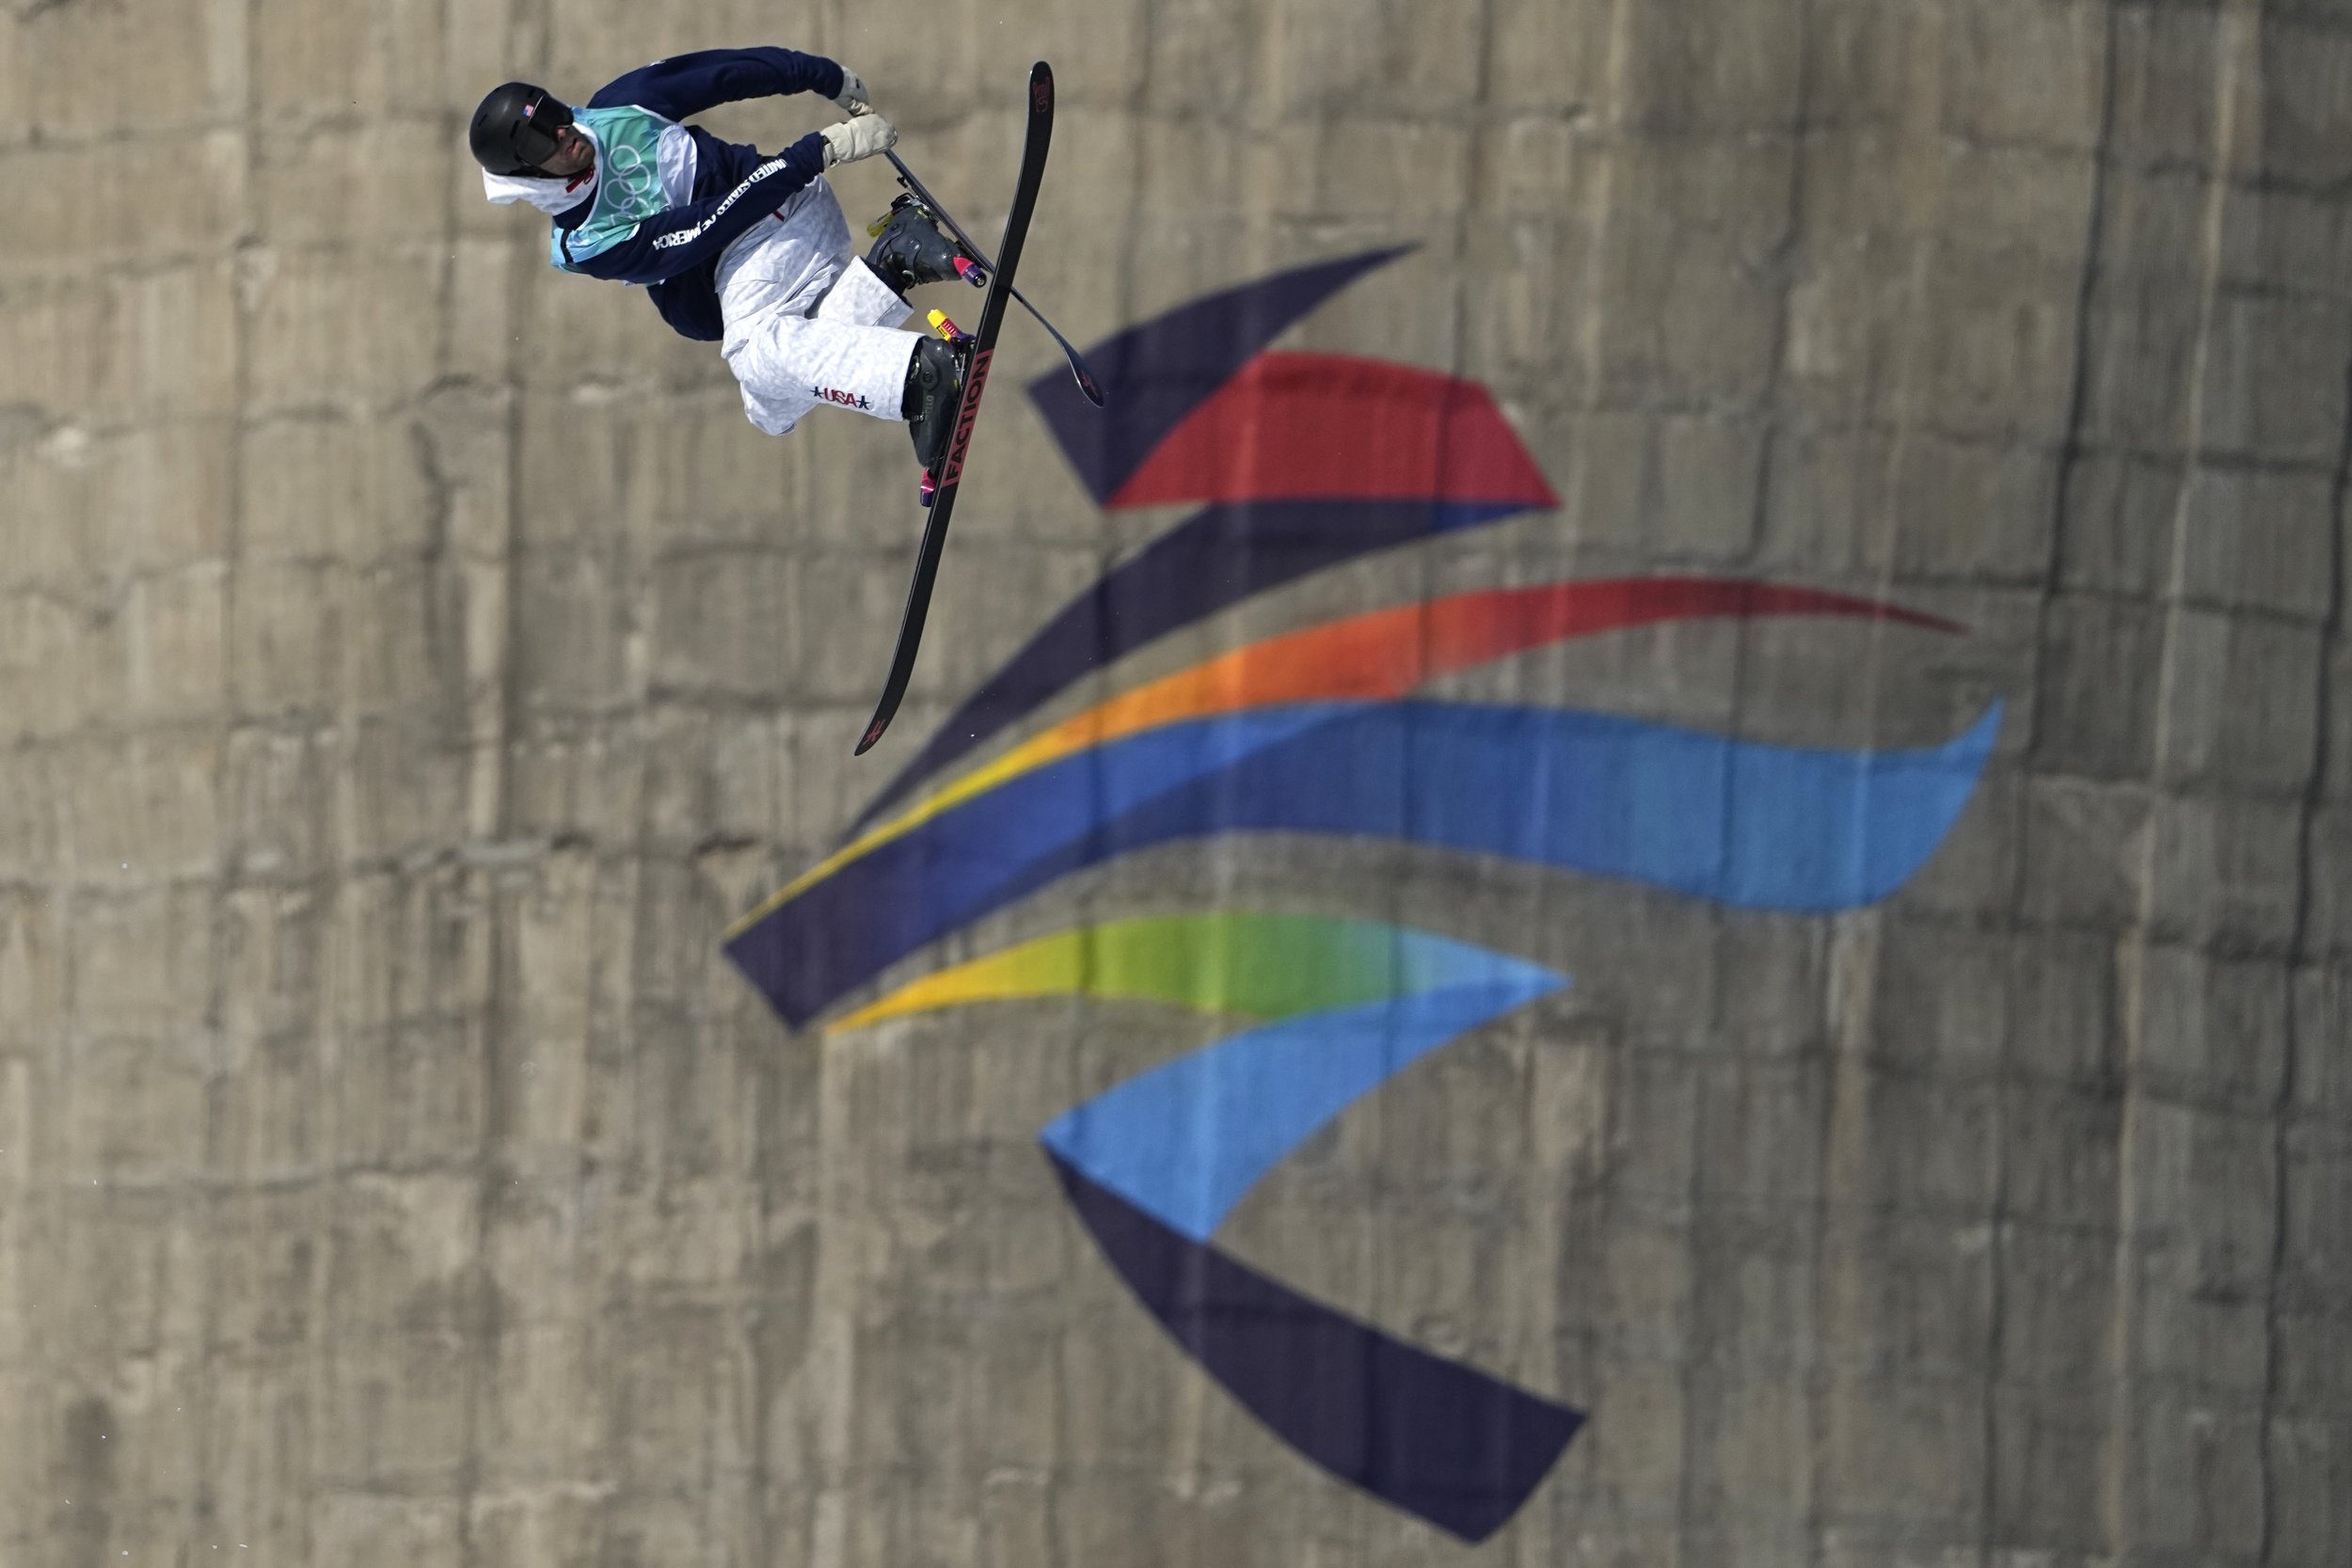  Alexander Hall of the United States competes during the men's freestyle skiing big air finals of the 2022 Winter Olympics, Wednesday, Feb. 9, 2022, in Beijing. (AP Photo/Jae C. Hong) 